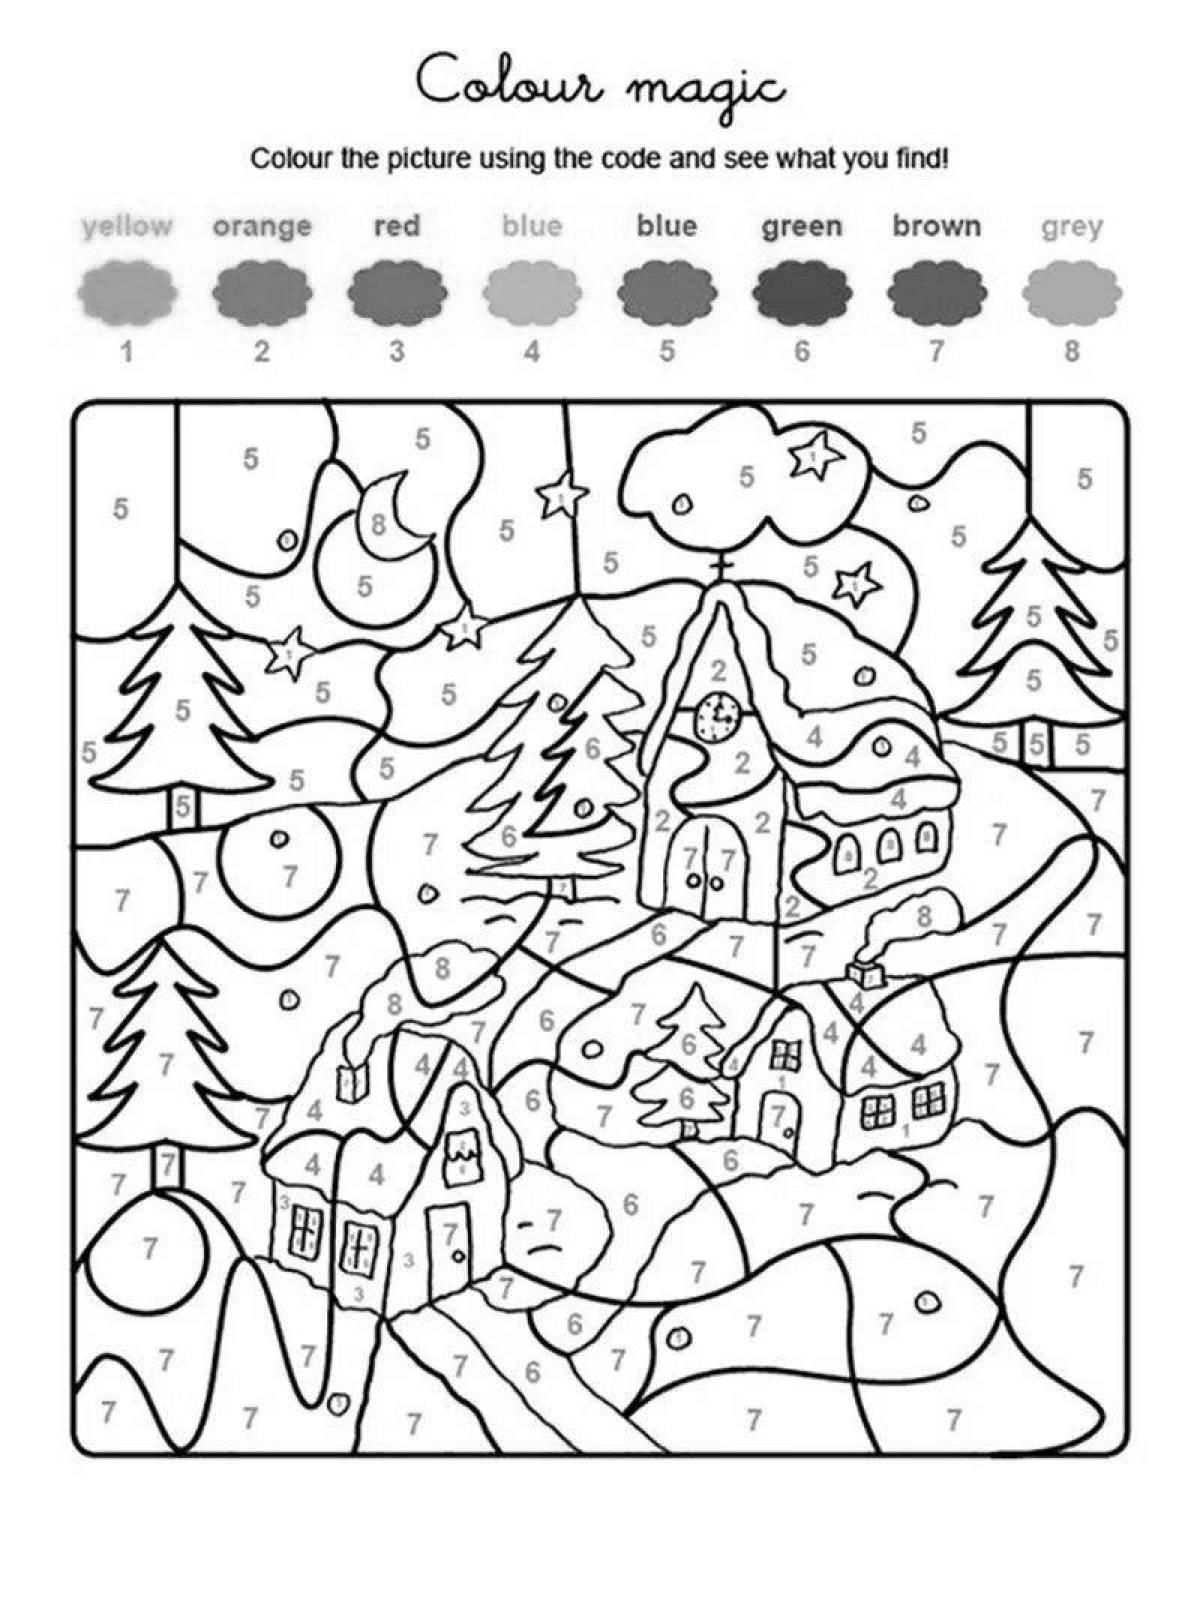 Magic tree by numbers coloring page